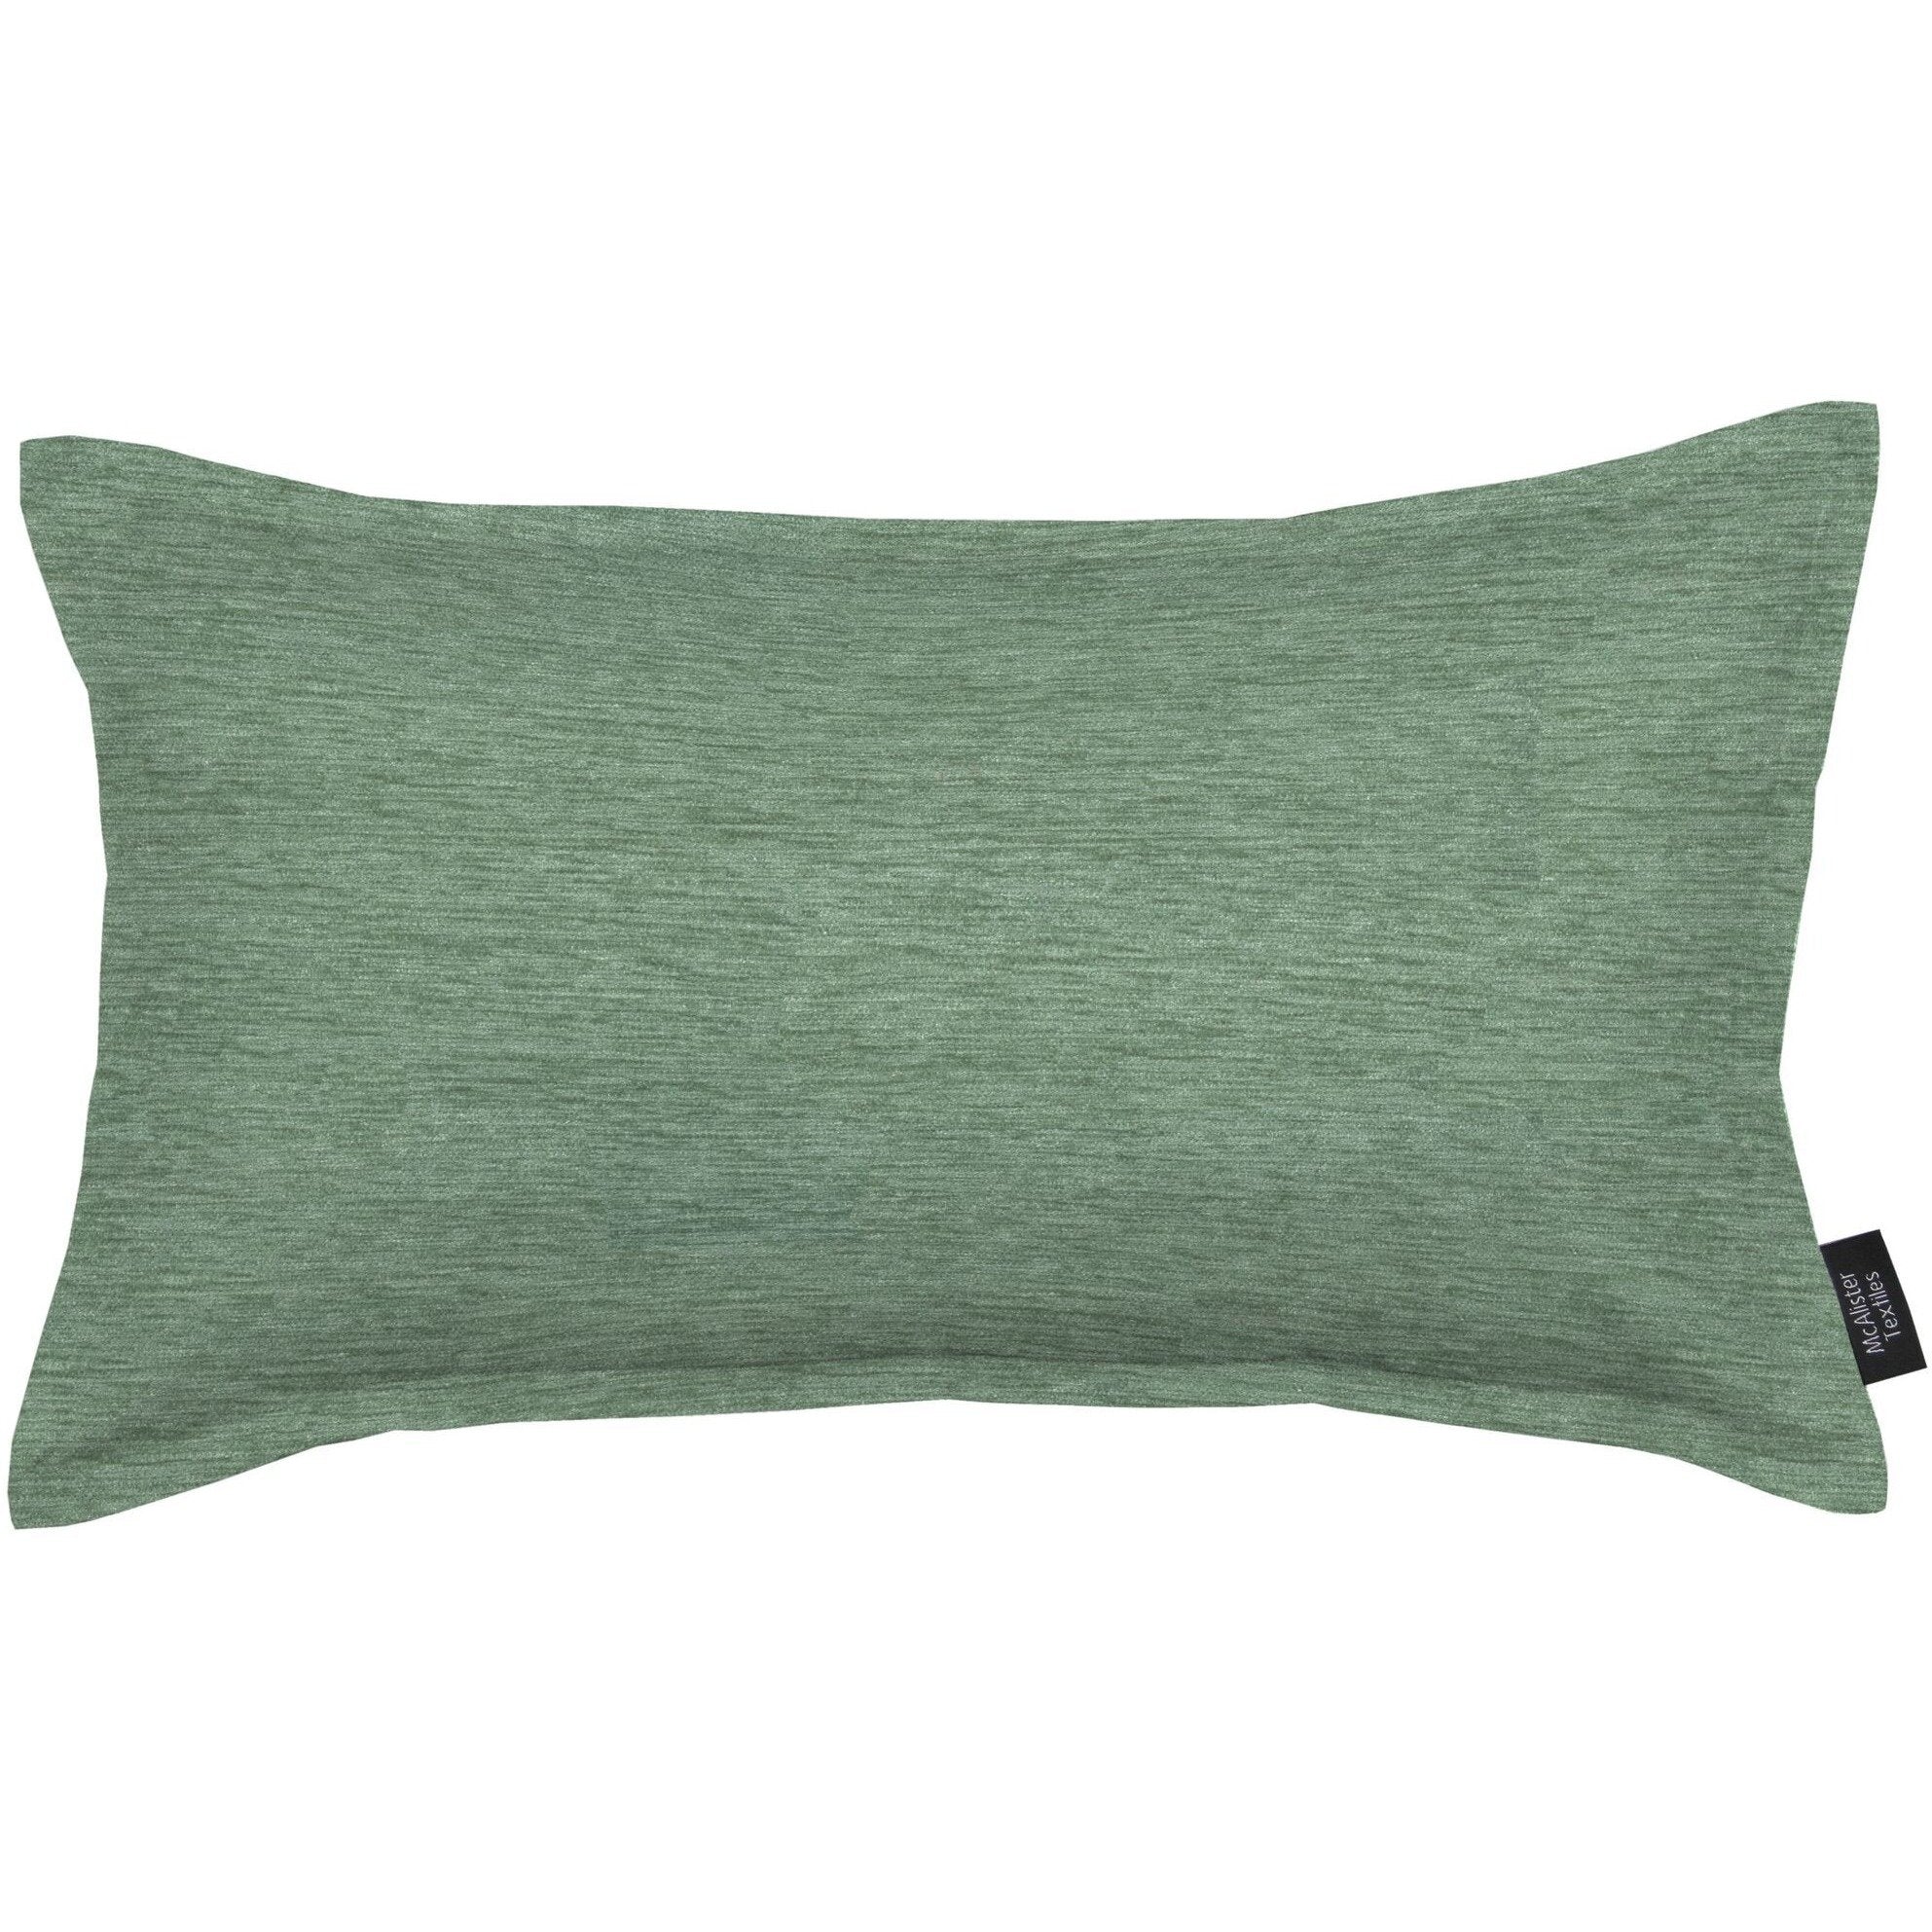 McAlister Textiles Plain Chenille Duck Egg Blue Cushion Cushions and Covers Polyester Filler 60cm x 40cm 